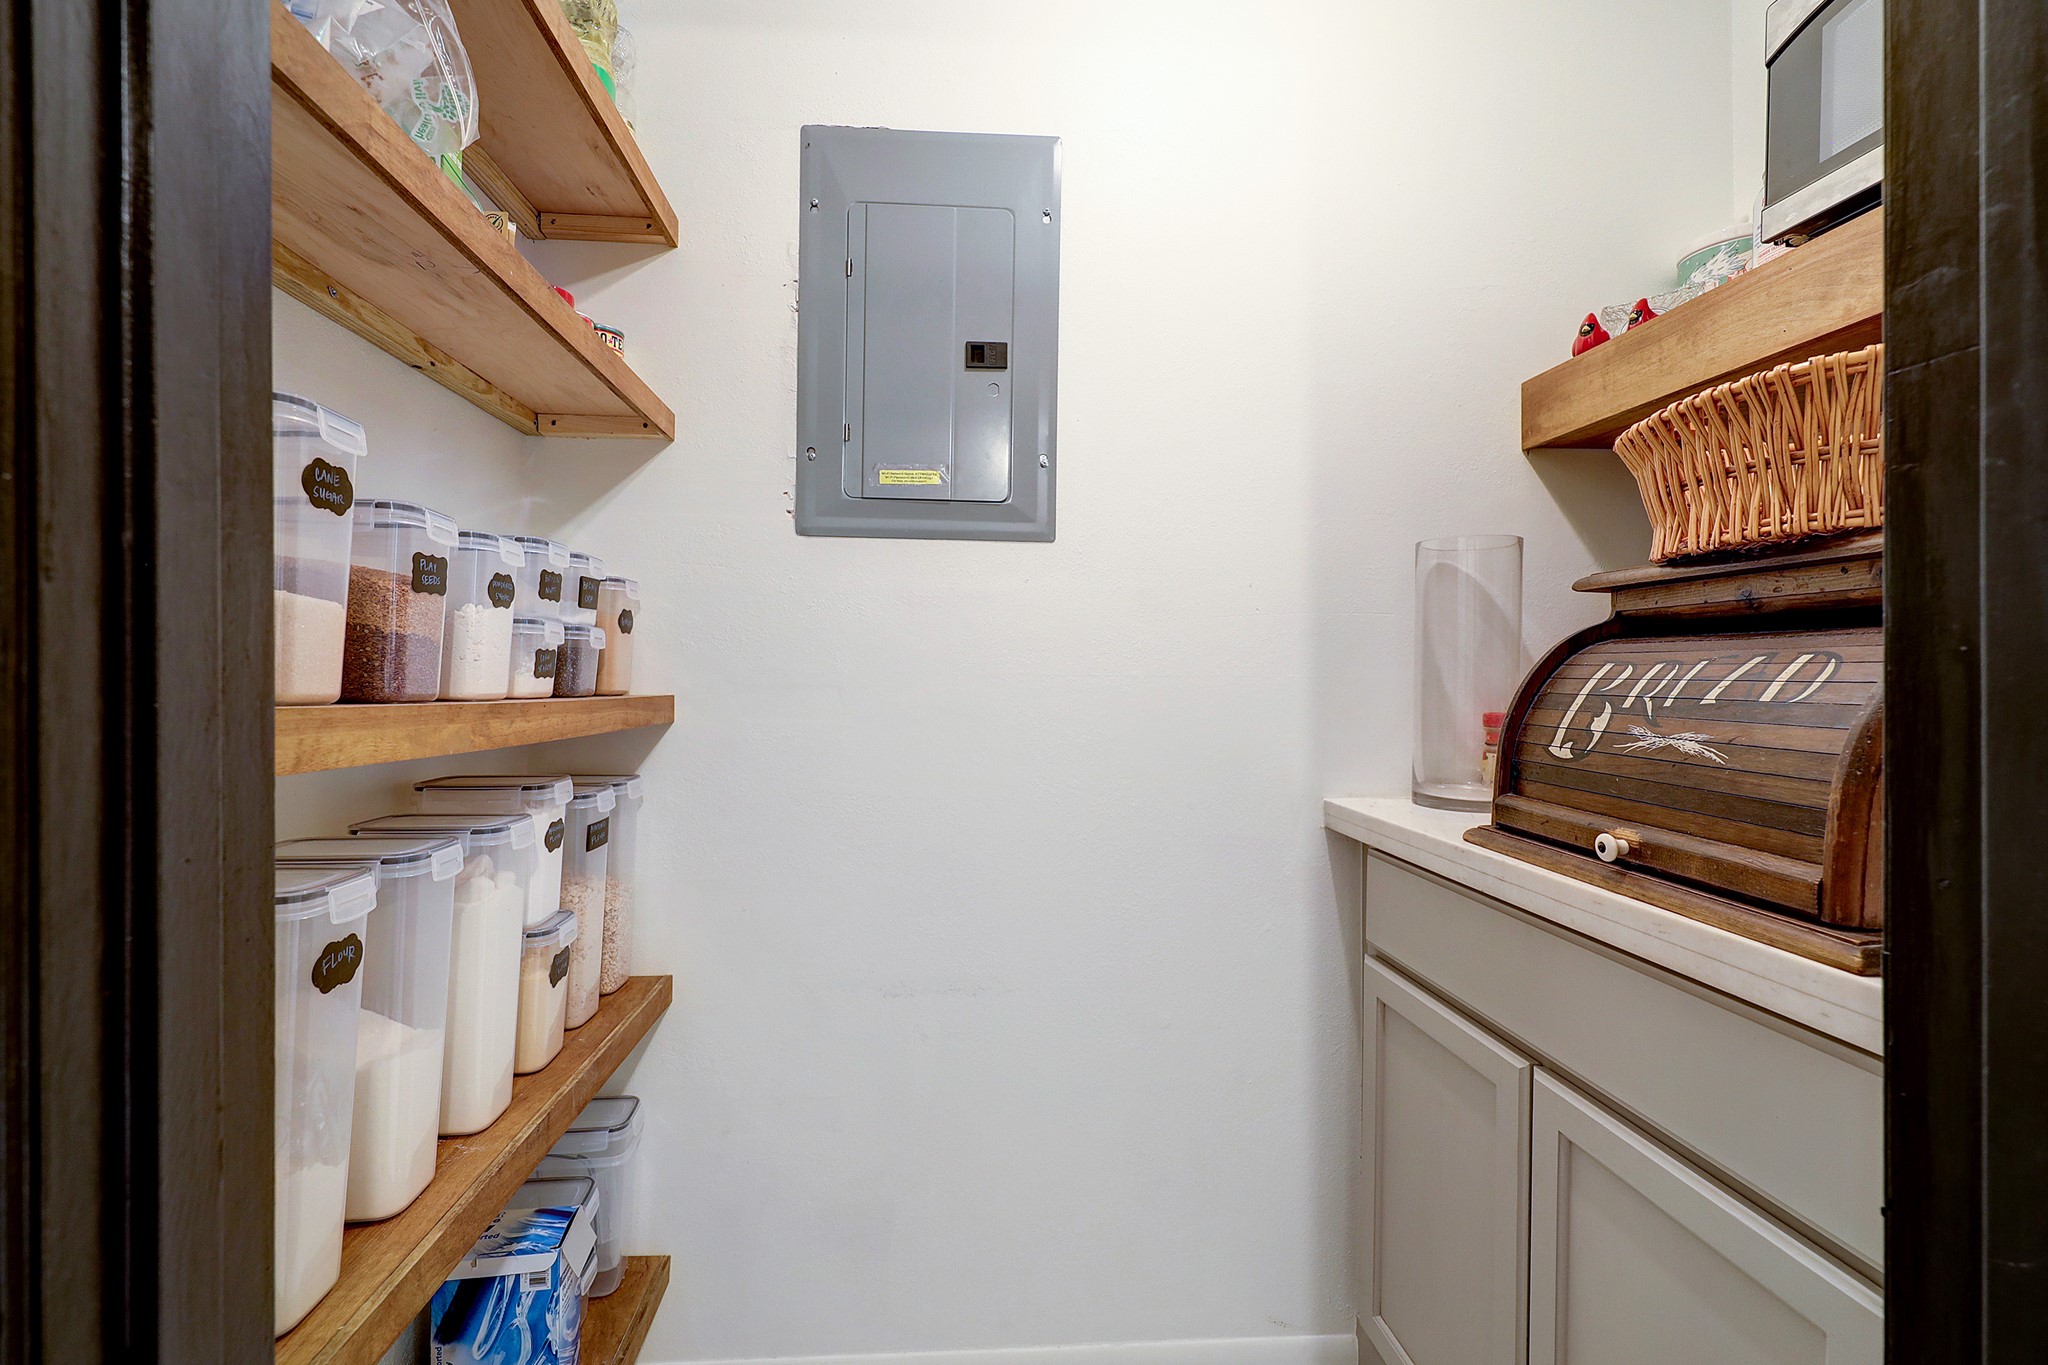 A cute walk in pantry and coffee bar area!